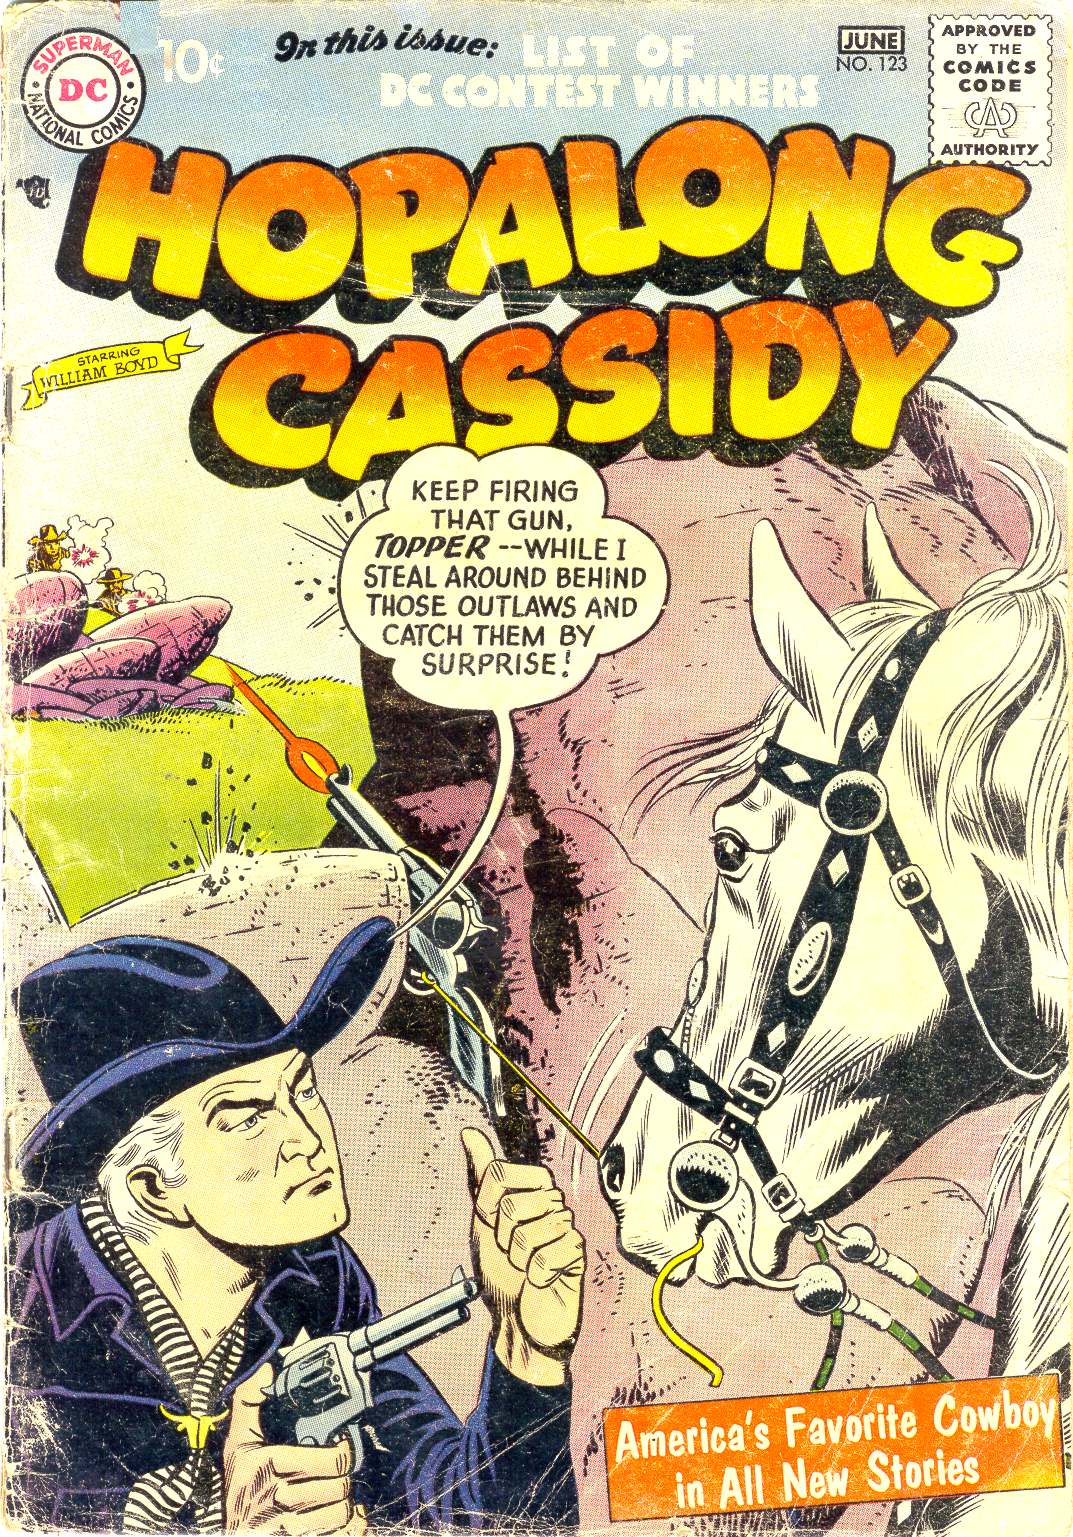 Read online Hopalong Cassidy comic -  Issue #123 - 1